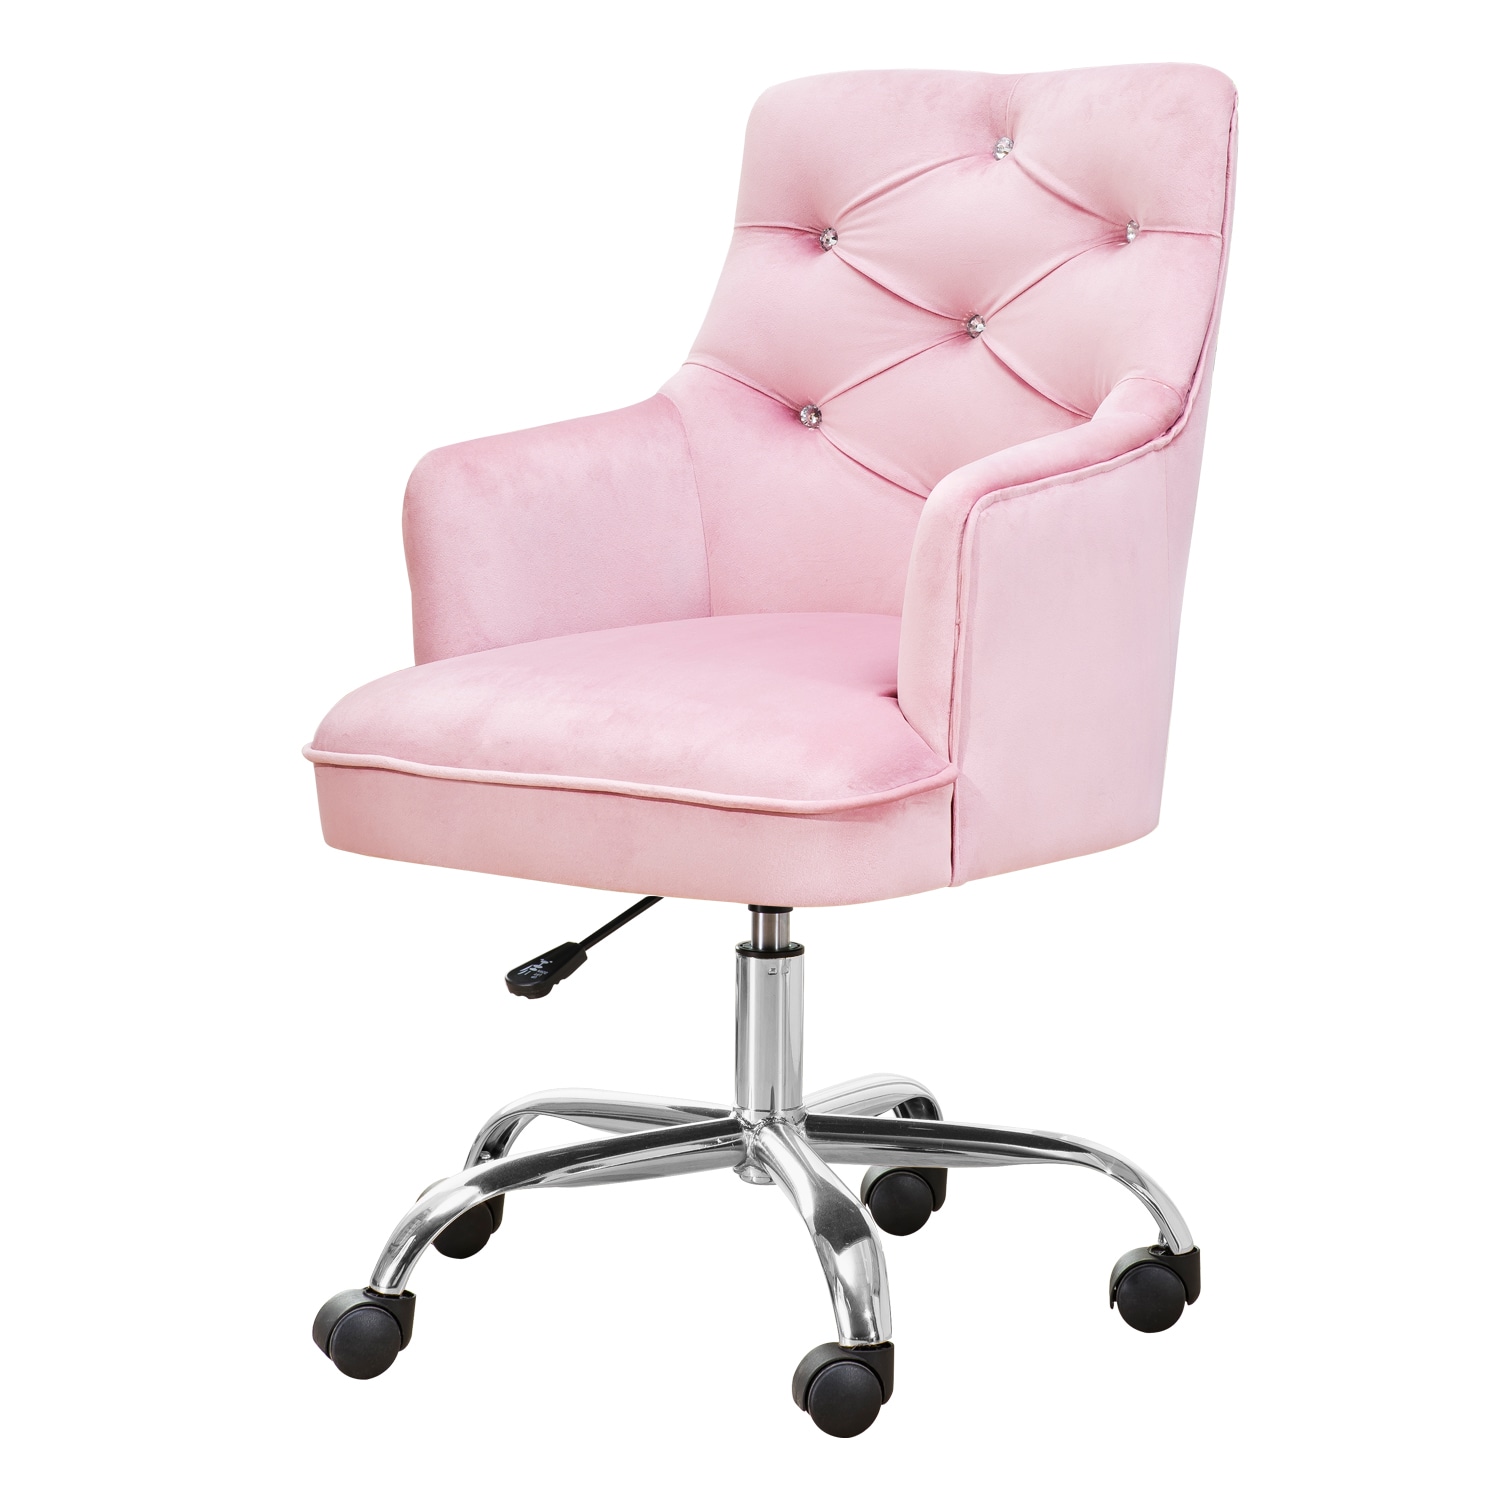 25 Pink Office Supplies & Accessories For Your Workplace